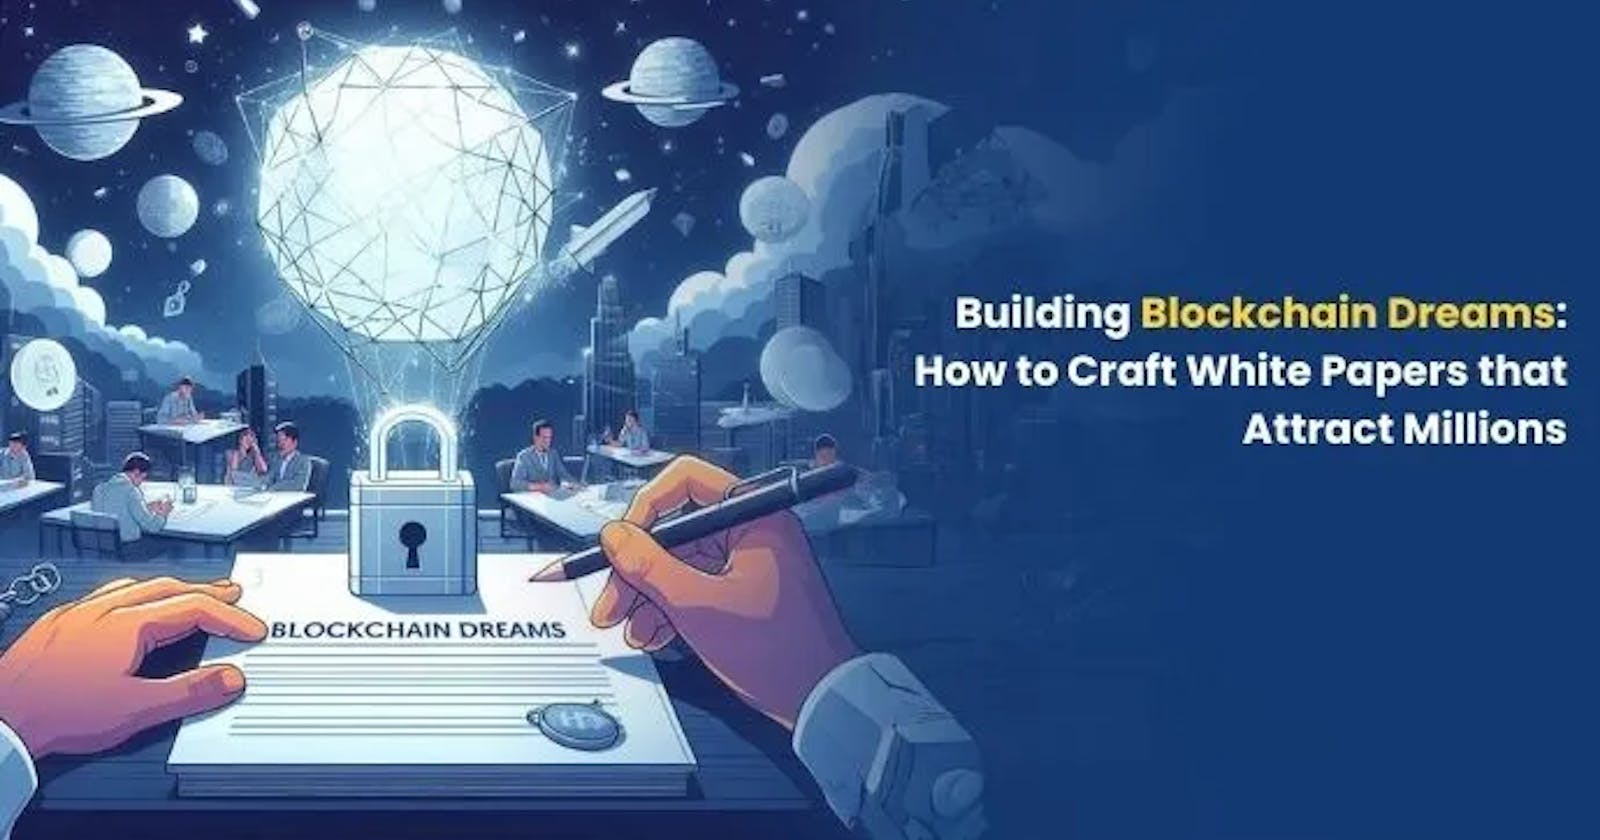 Building Blockchain Dreams: How to Craft White Papers that Attract Millions